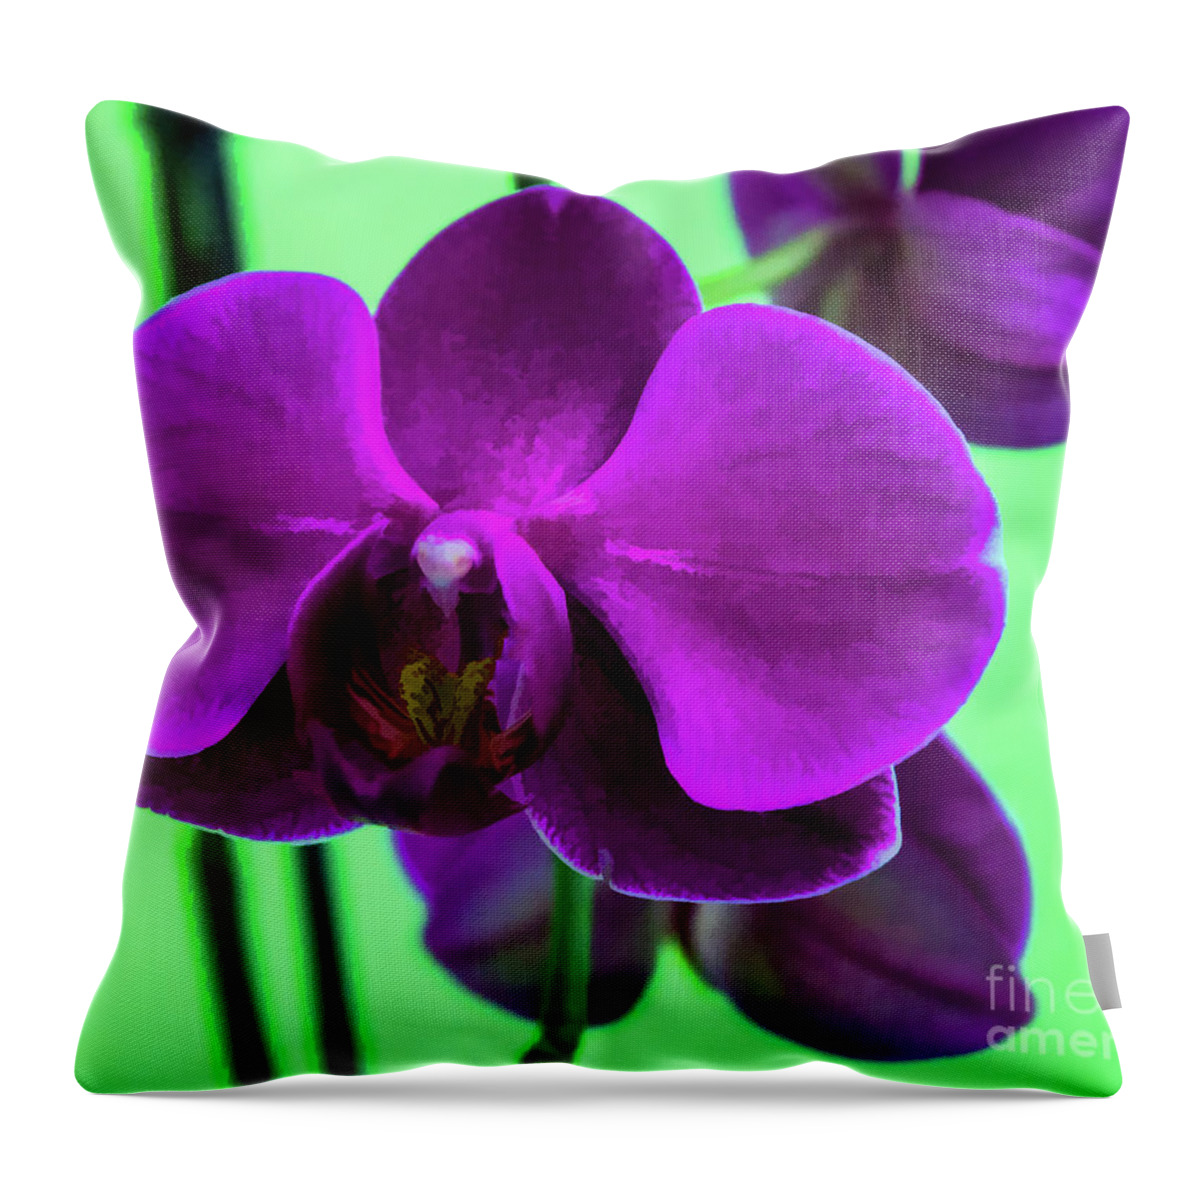 Exposed Throw Pillow featuring the photograph Exposed Orchid by Roberta Byram